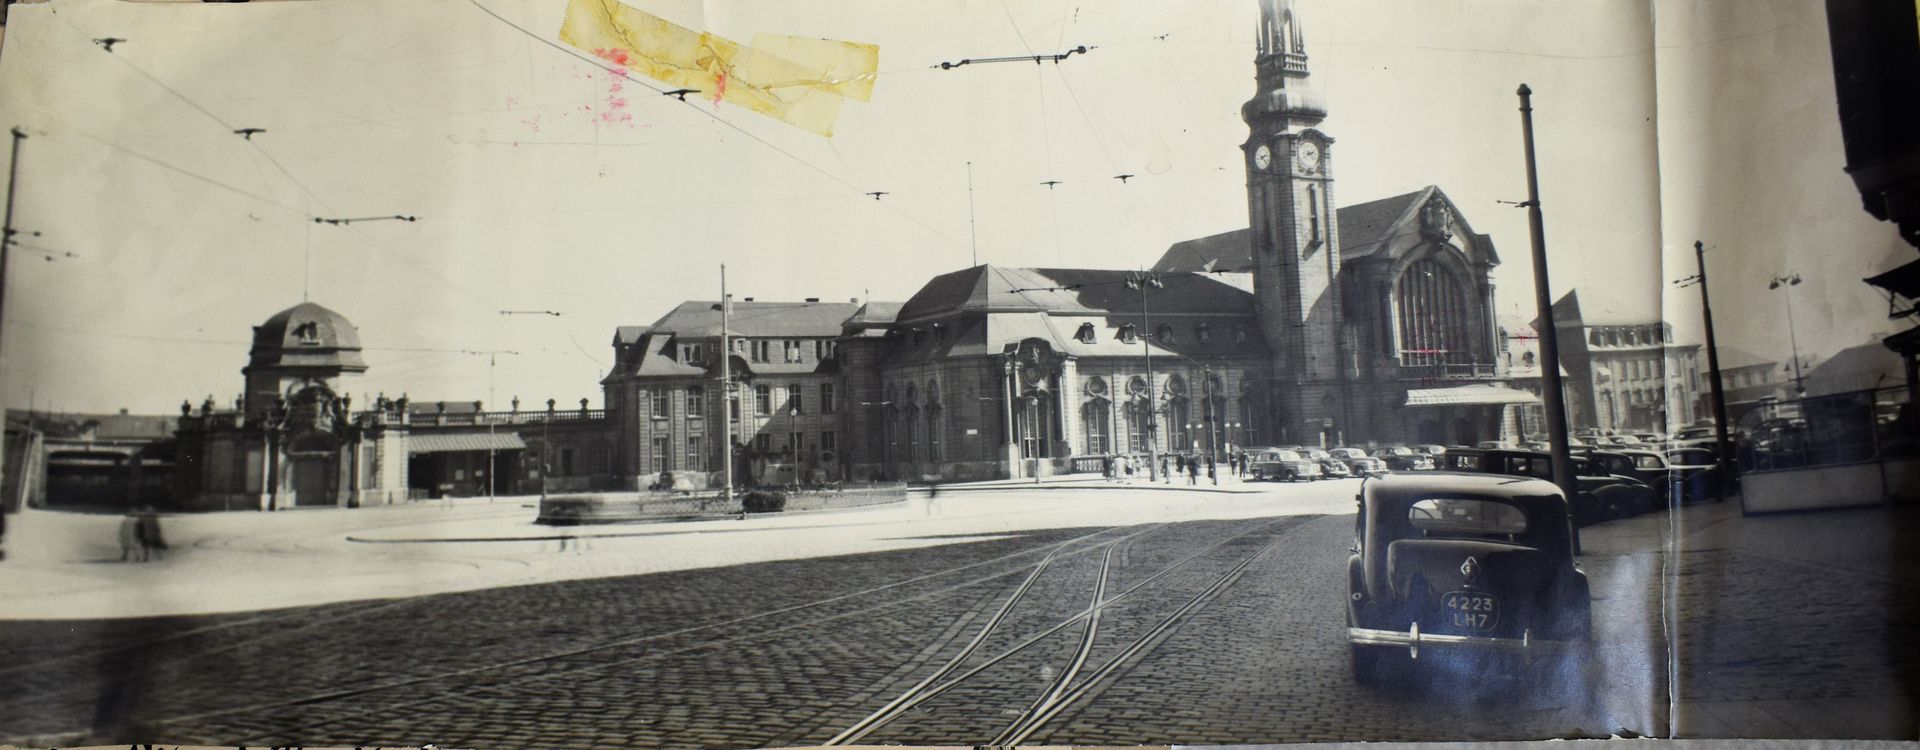 Null (STATION) Photograph of the Metz train station in the late 1930s, with cars&hellip;